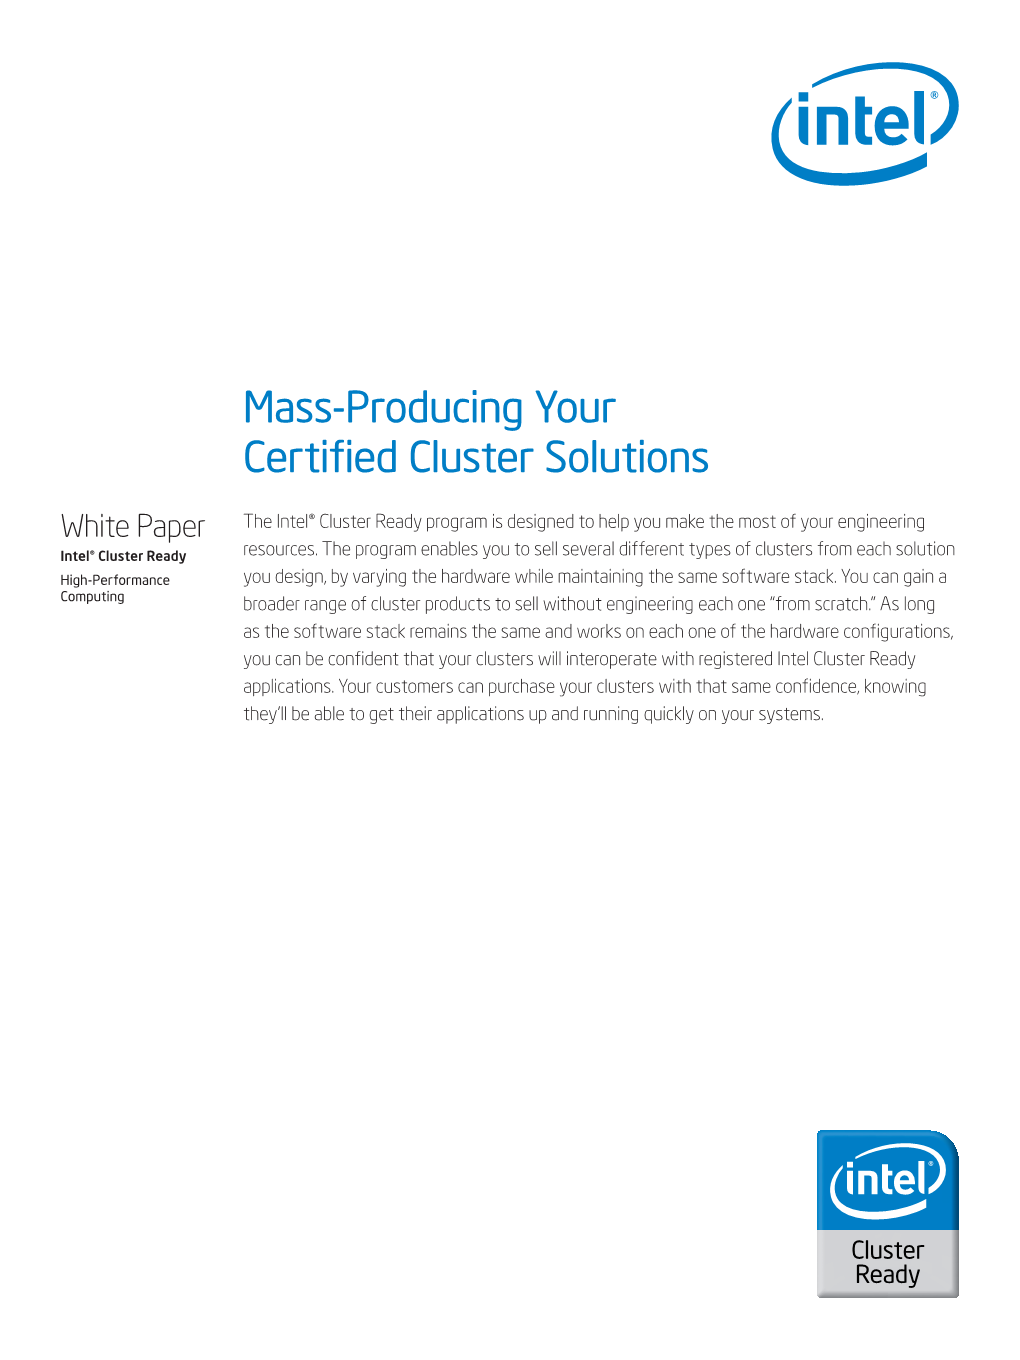 Mass-Producing Your Certified Cluster Solutions